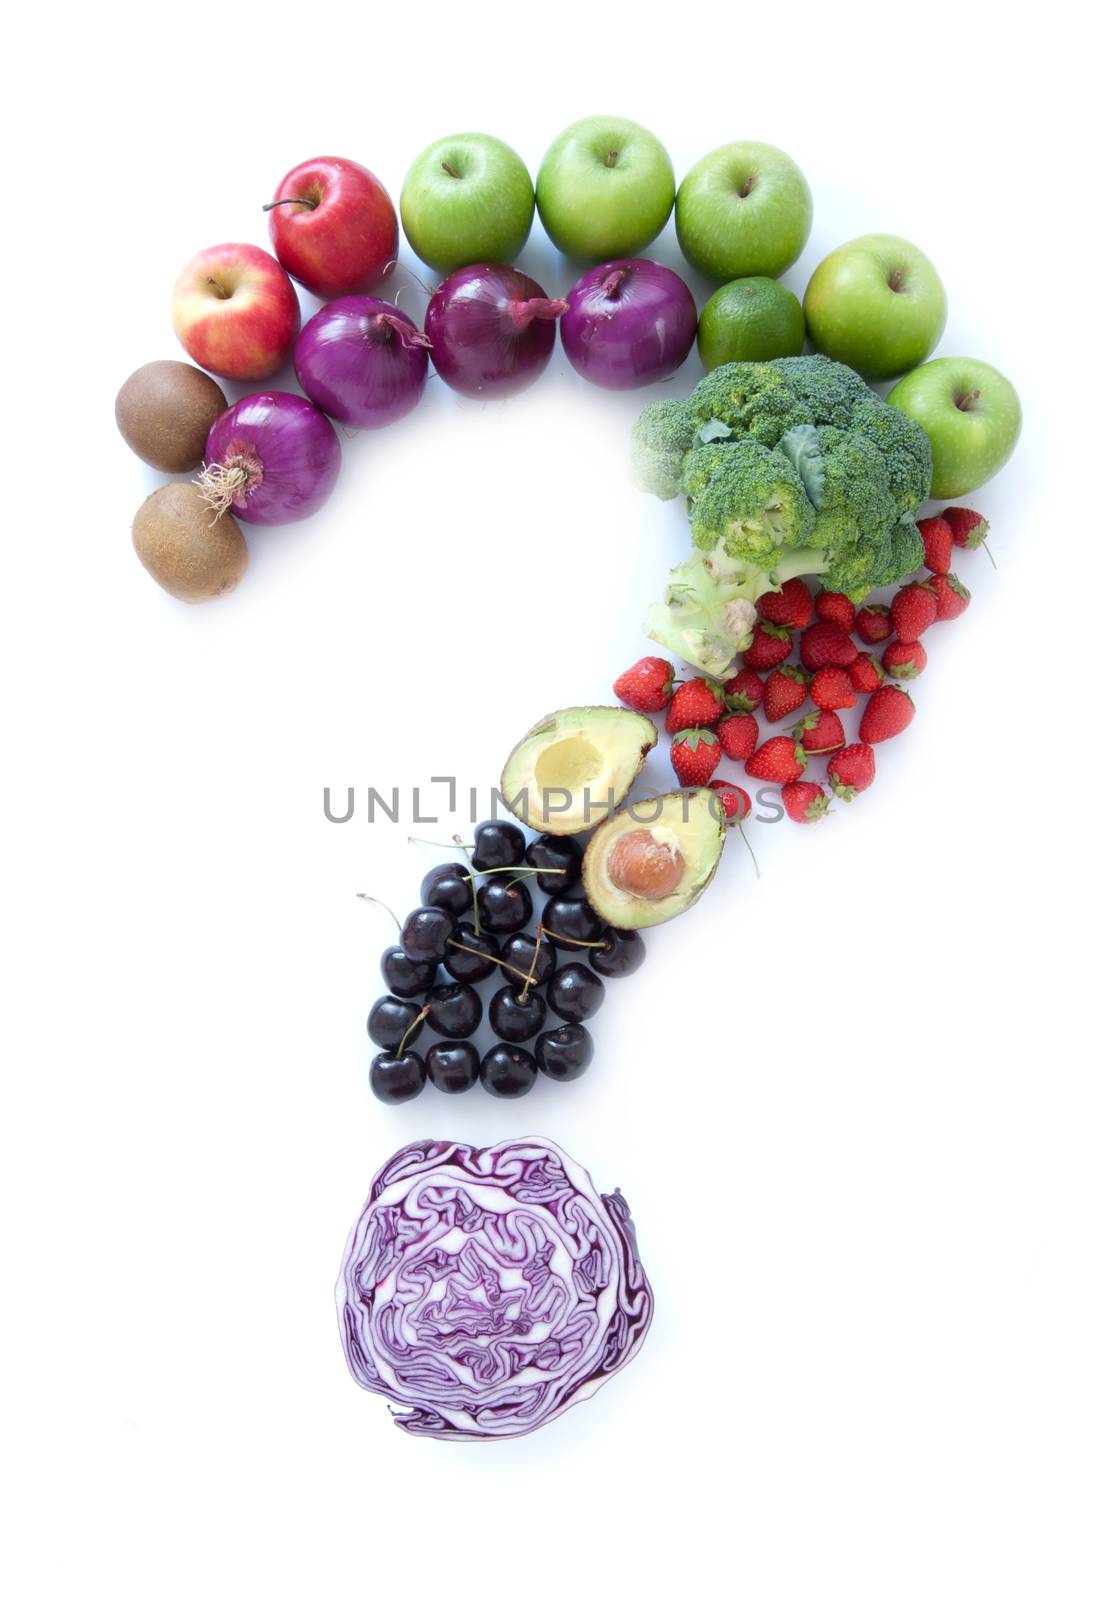 Question mark made from fruits and vegetables over a white background